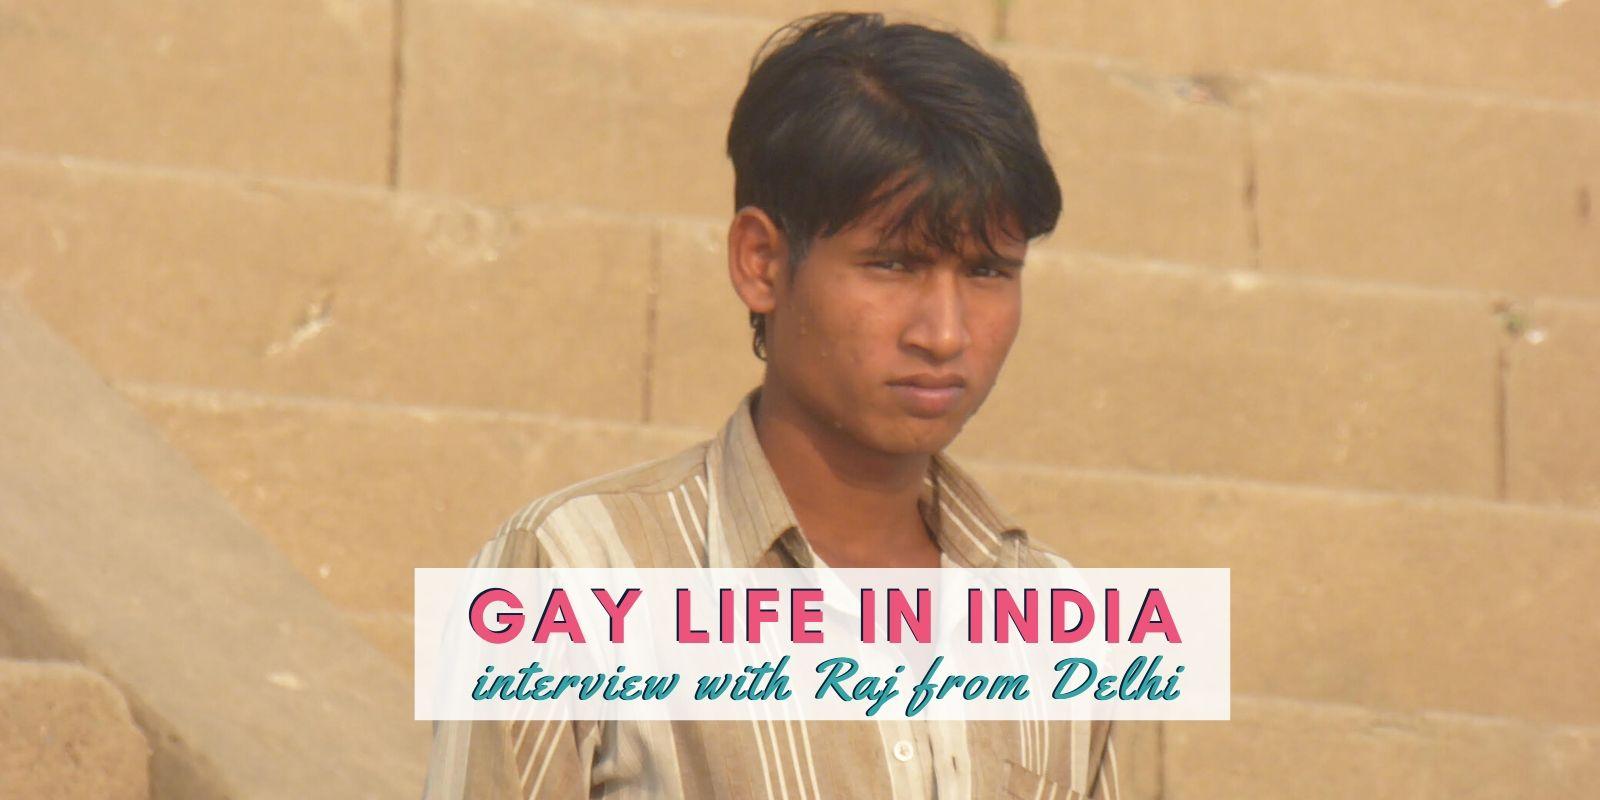 Find out what's it like to live in India as a gay person in our interview with local boy Raj